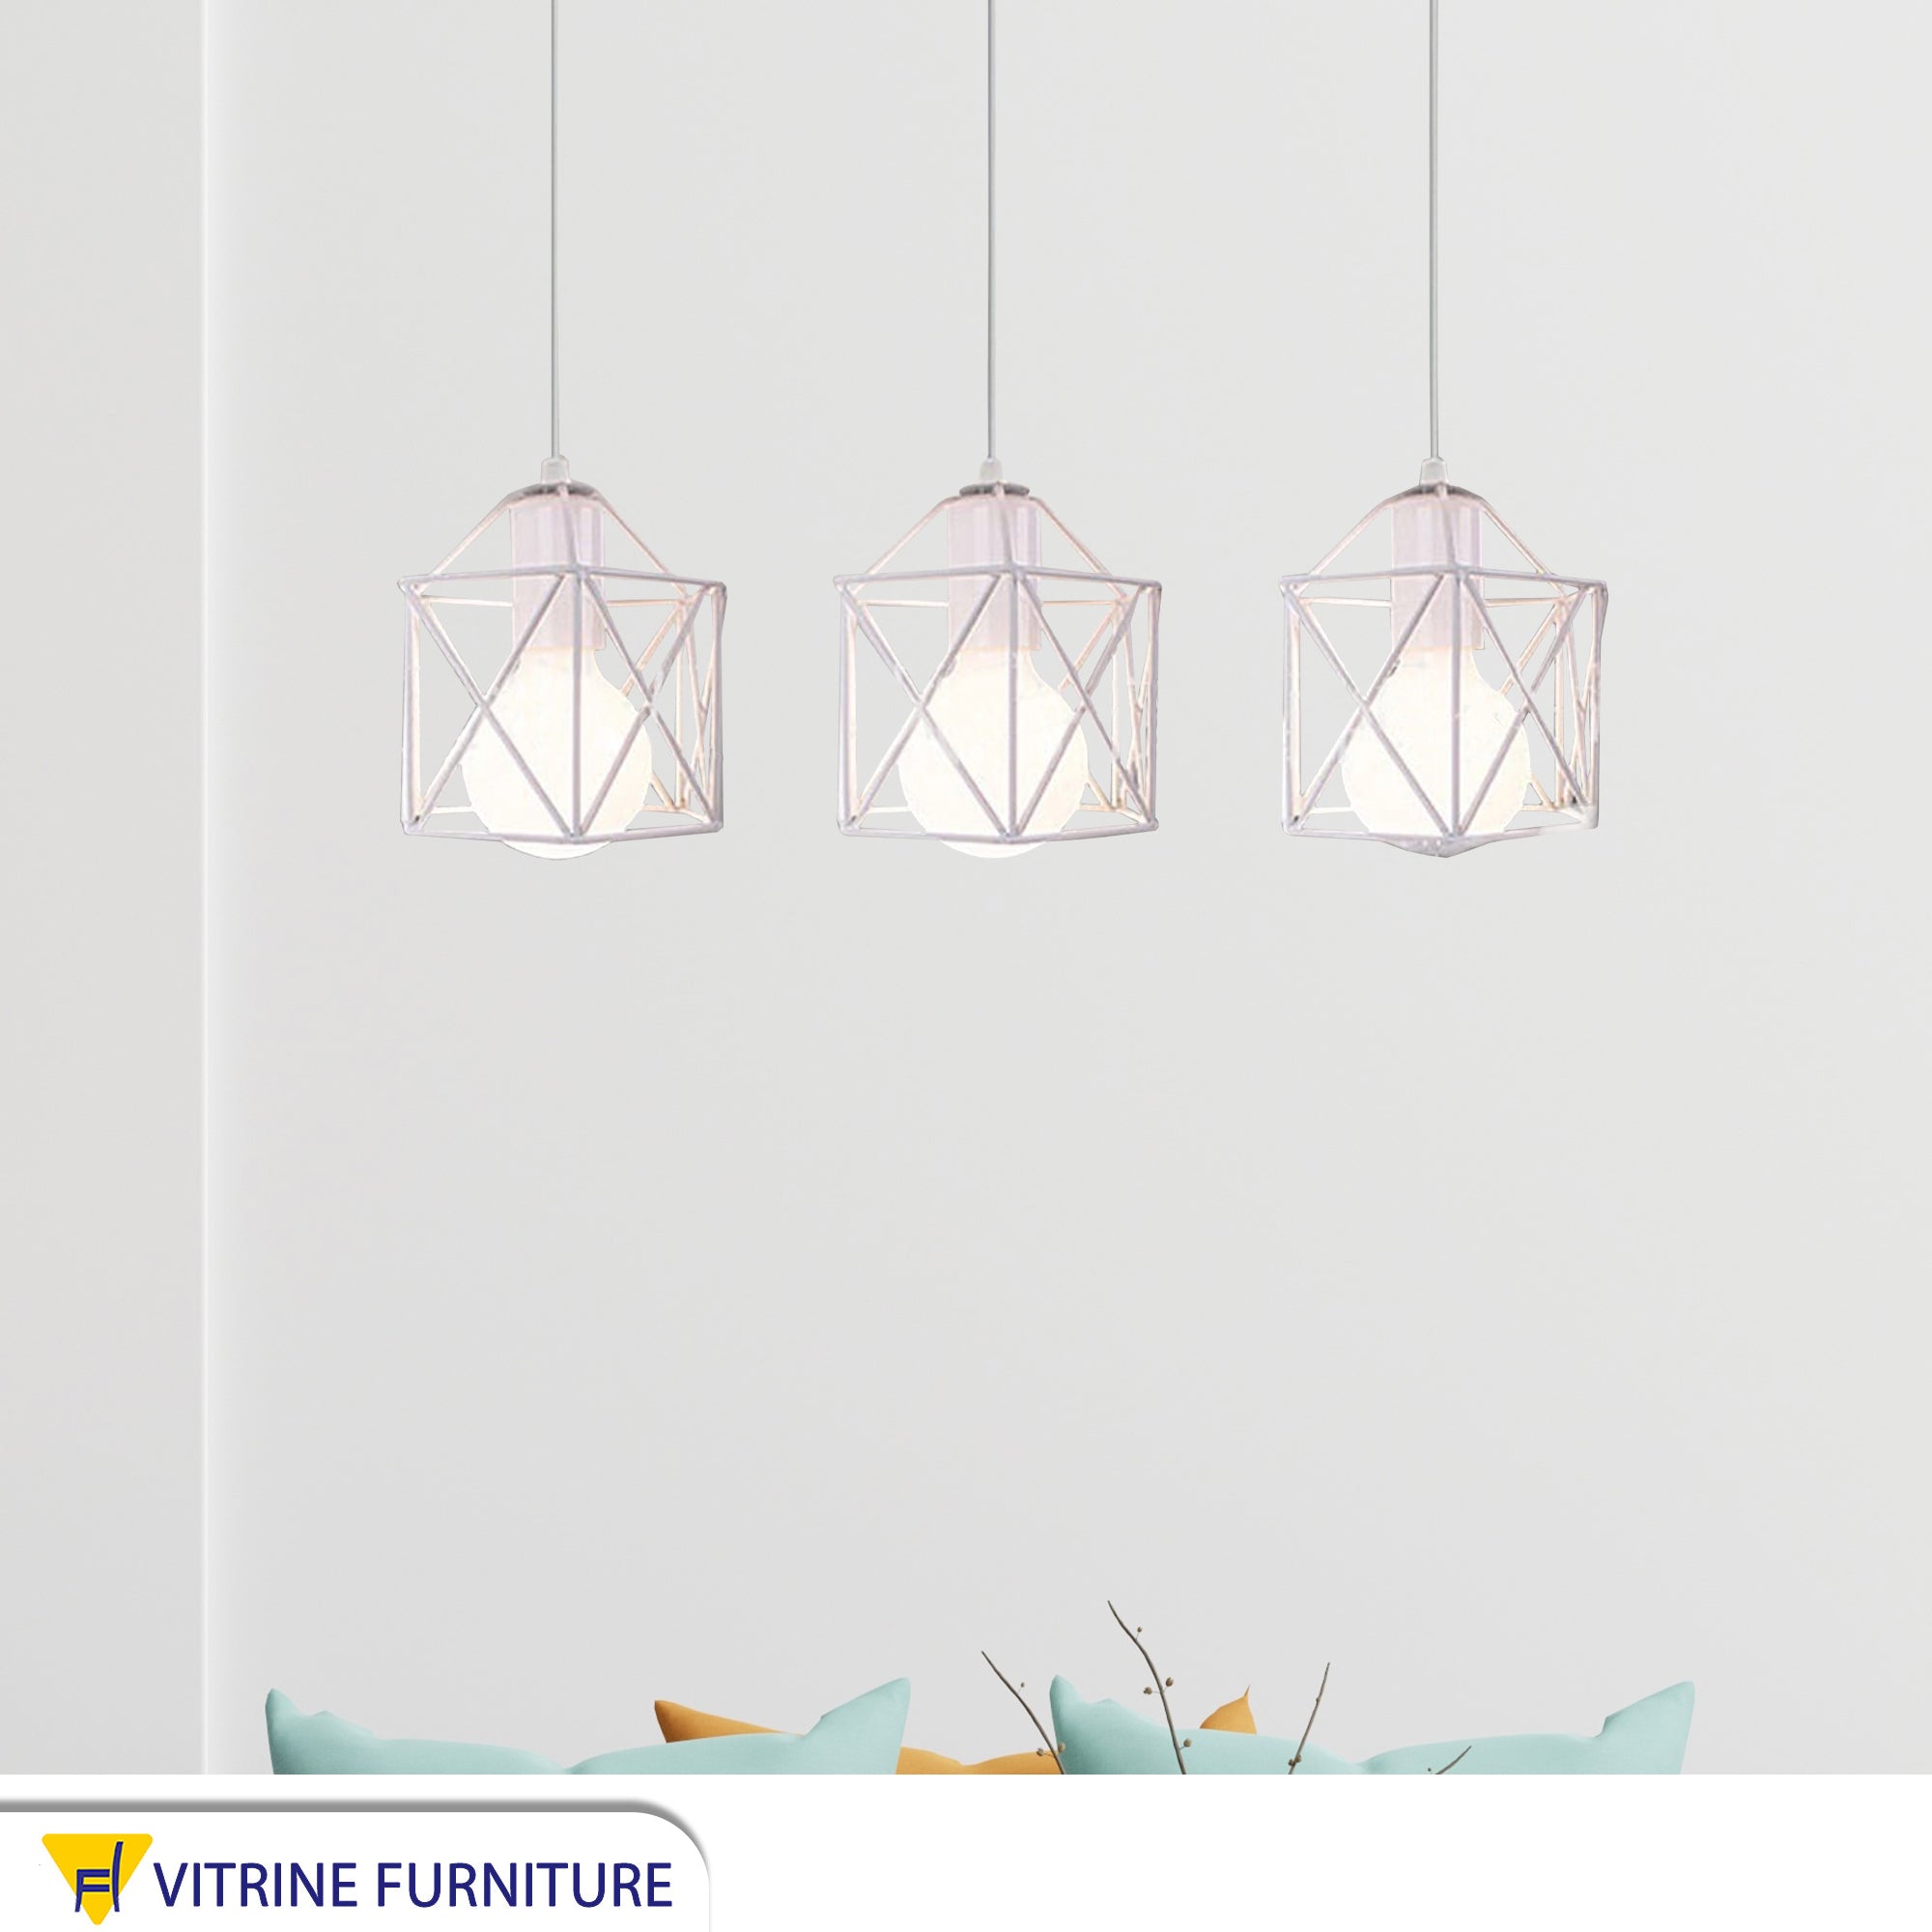 Chandelier with a white metal frame, X-cage shape